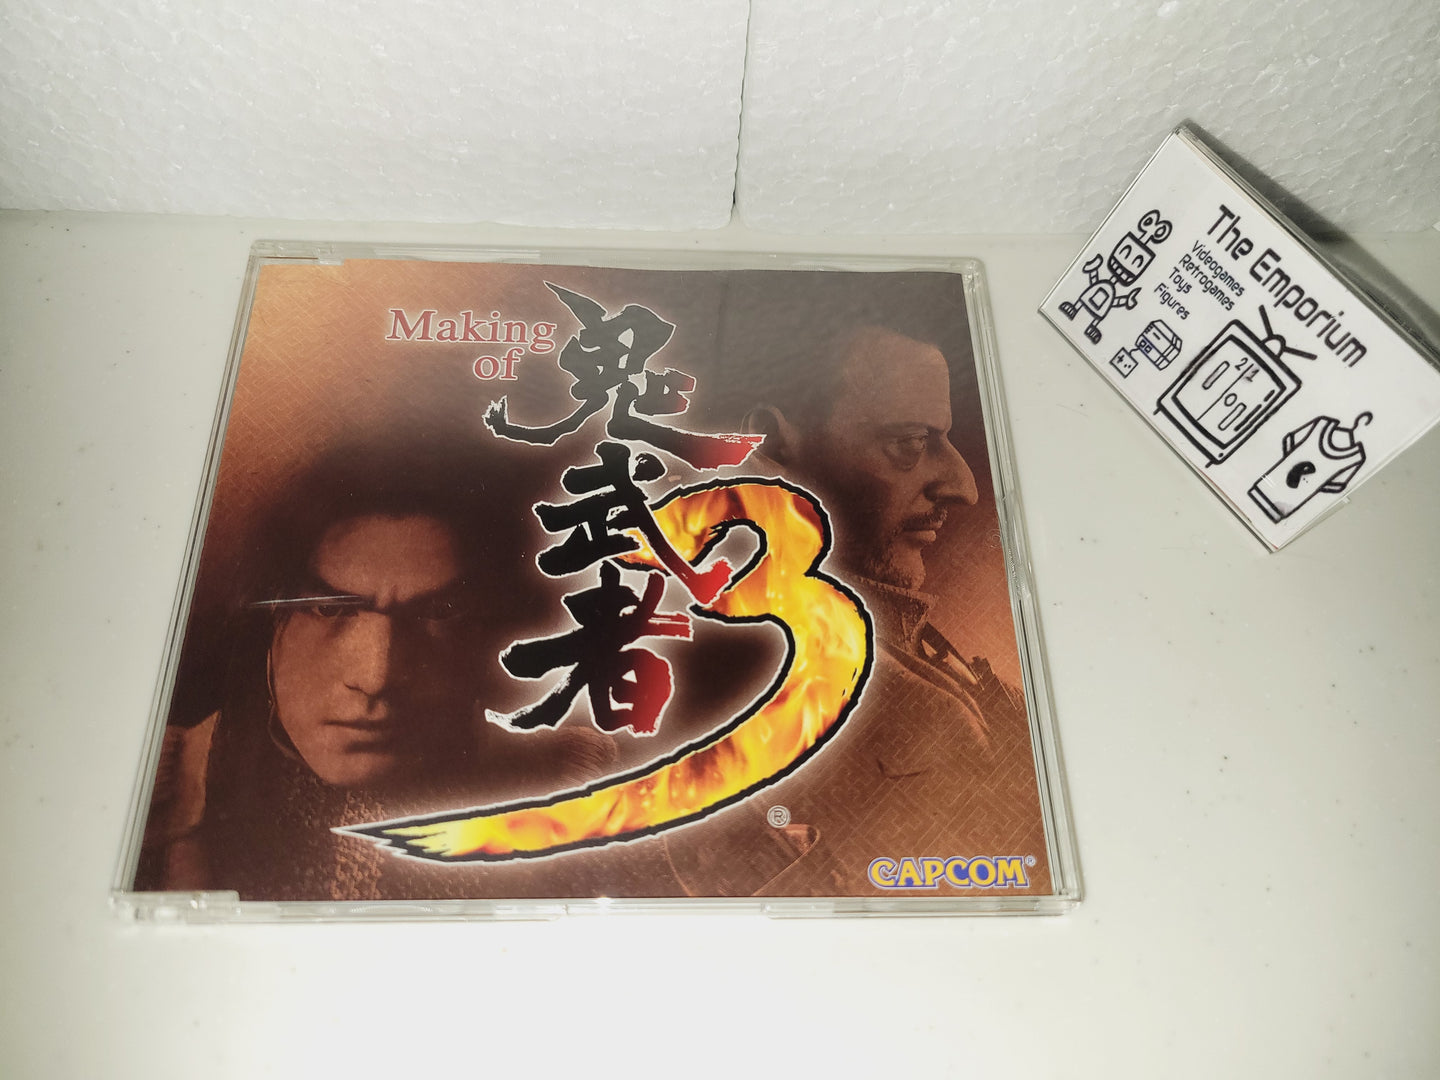 Onimusha 3 Making of promo dvd -not for sale- - dvd video